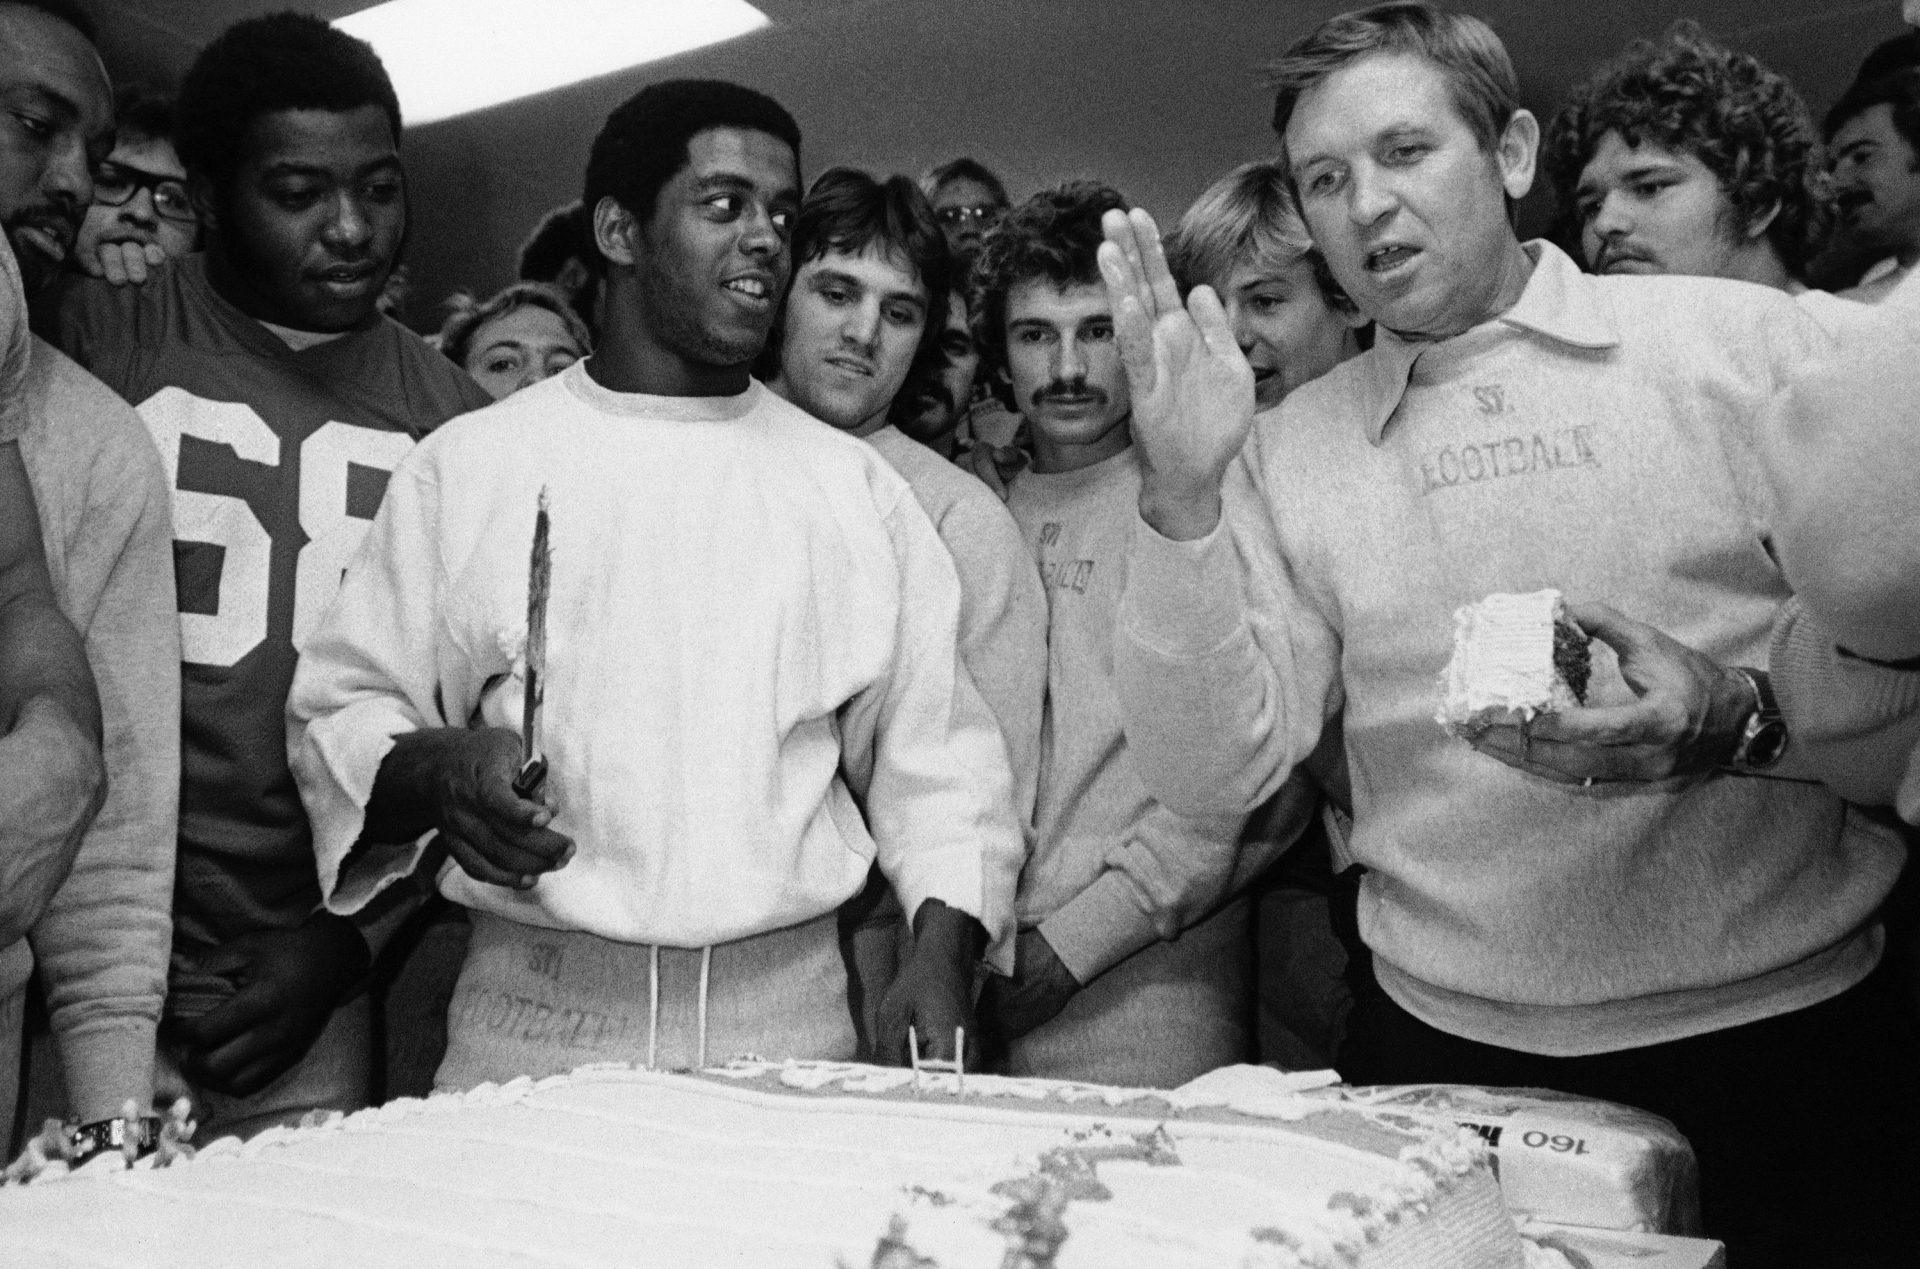 University of Pittsburgh running back Tony Dorsett, with knife, gets a little coaching about cake cutting by Pitt mentor Johnny Majors, right, before practice, Oct. 25, 1976 at Pitt Stadium in Pittsburgh. Dorsett, who broke the all-time NCAA rushing record on Saturday at Navy, was given a giant cake in the shape of a football field for his accomplishment by his teammate who surround him.